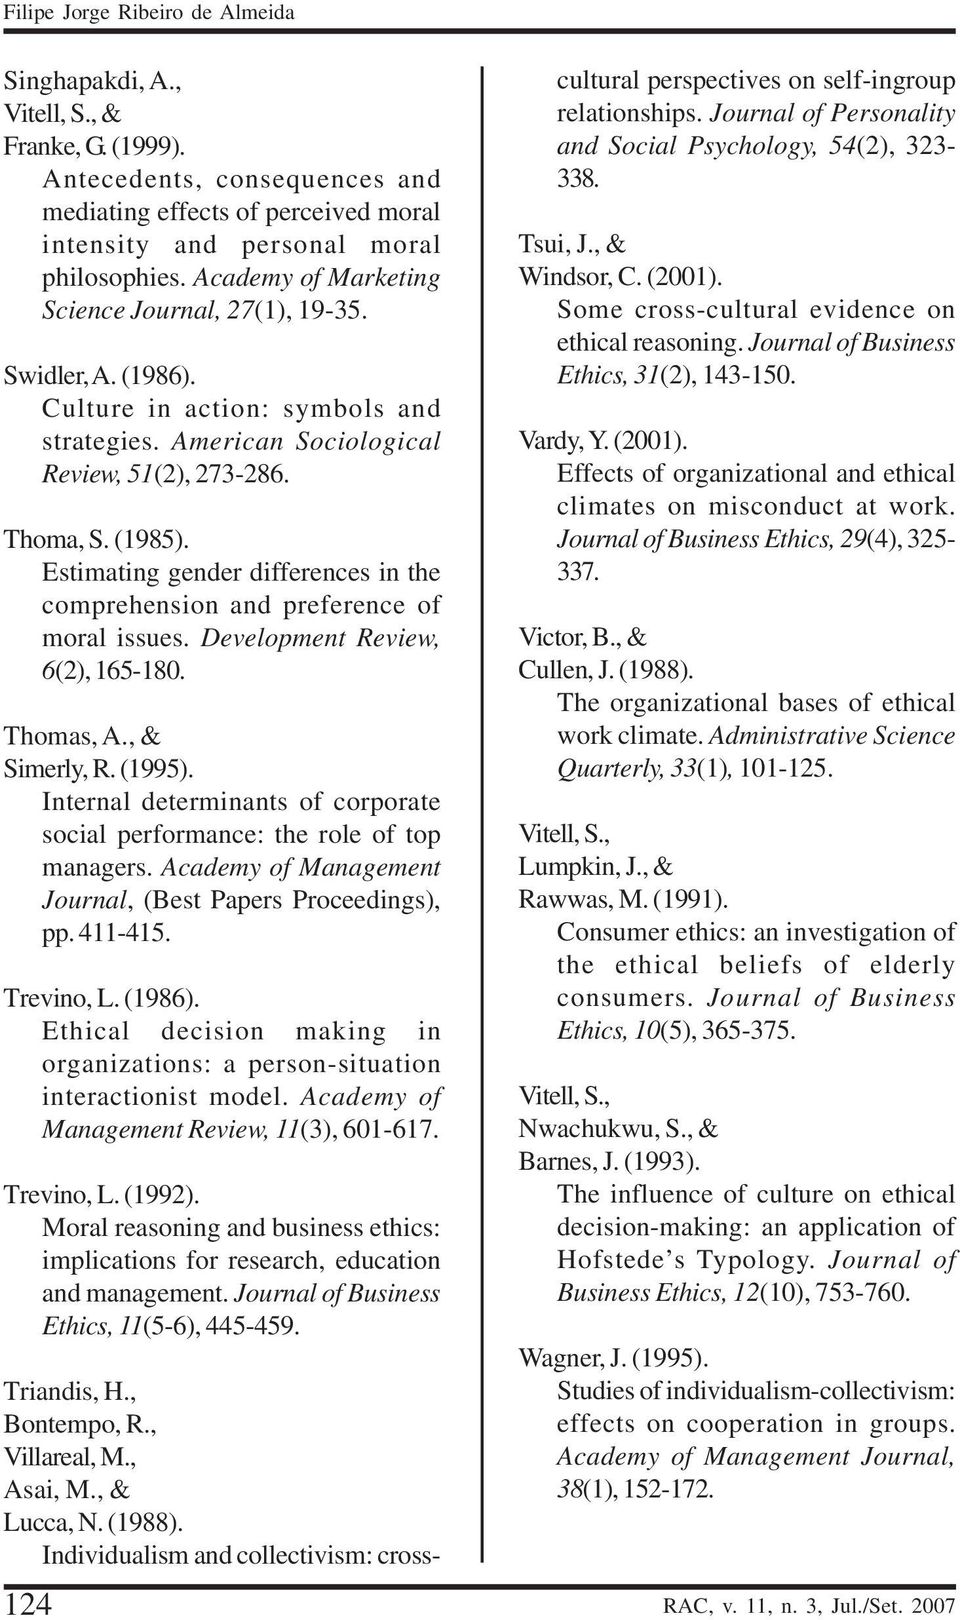 Estimating gender differences in the comprehension and preference of moral issues. Development Review, 6(2), 165-180. Thomas, A., & Simerly, R. (1995).